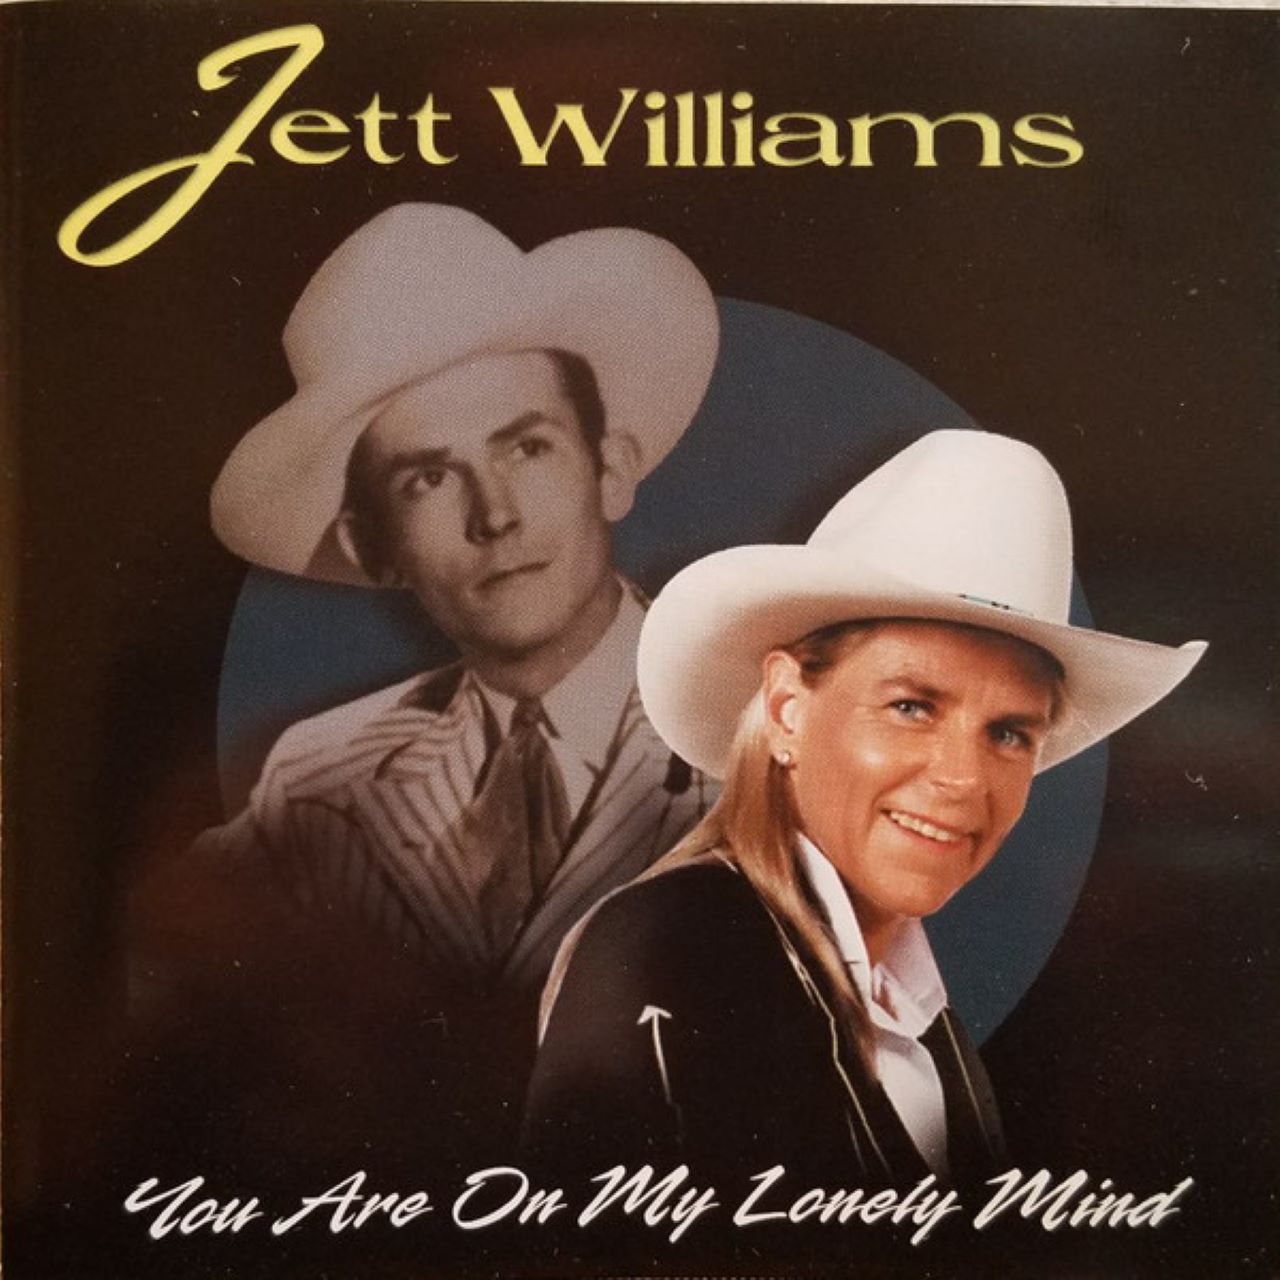 Jett Williams - You Are On My Lonely Mind cover album